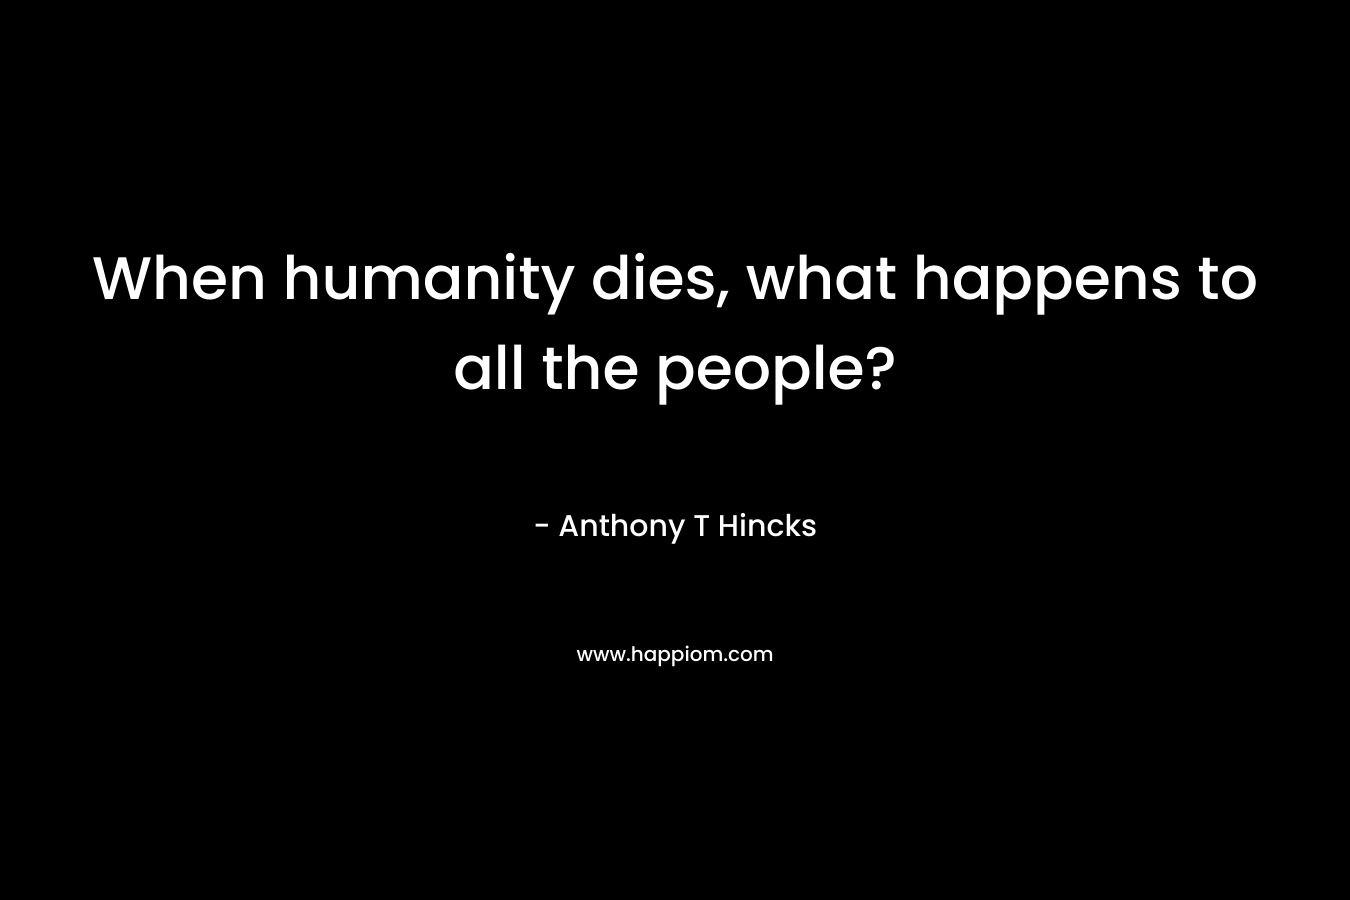 When humanity dies, what happens to all the people? – Anthony T Hincks